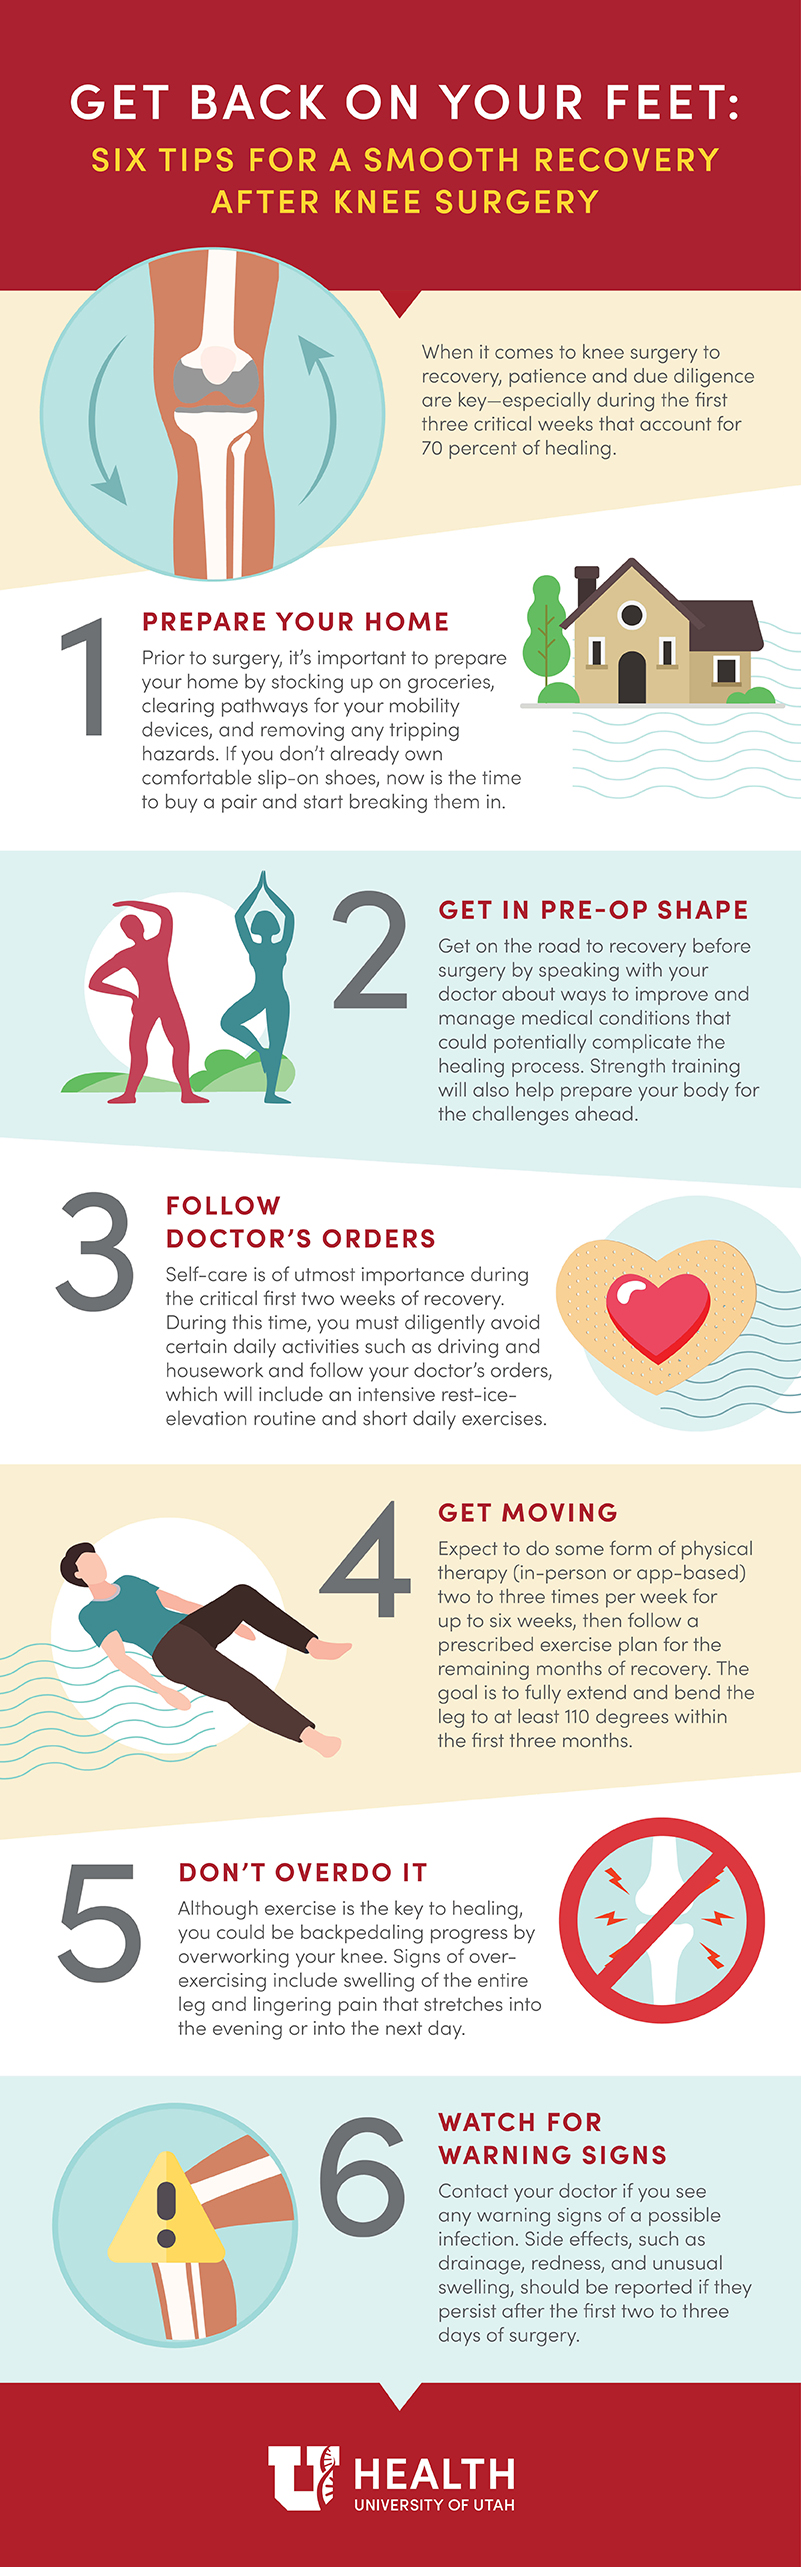 Infographic offers six tips for a smooth recovery after knee surgery.